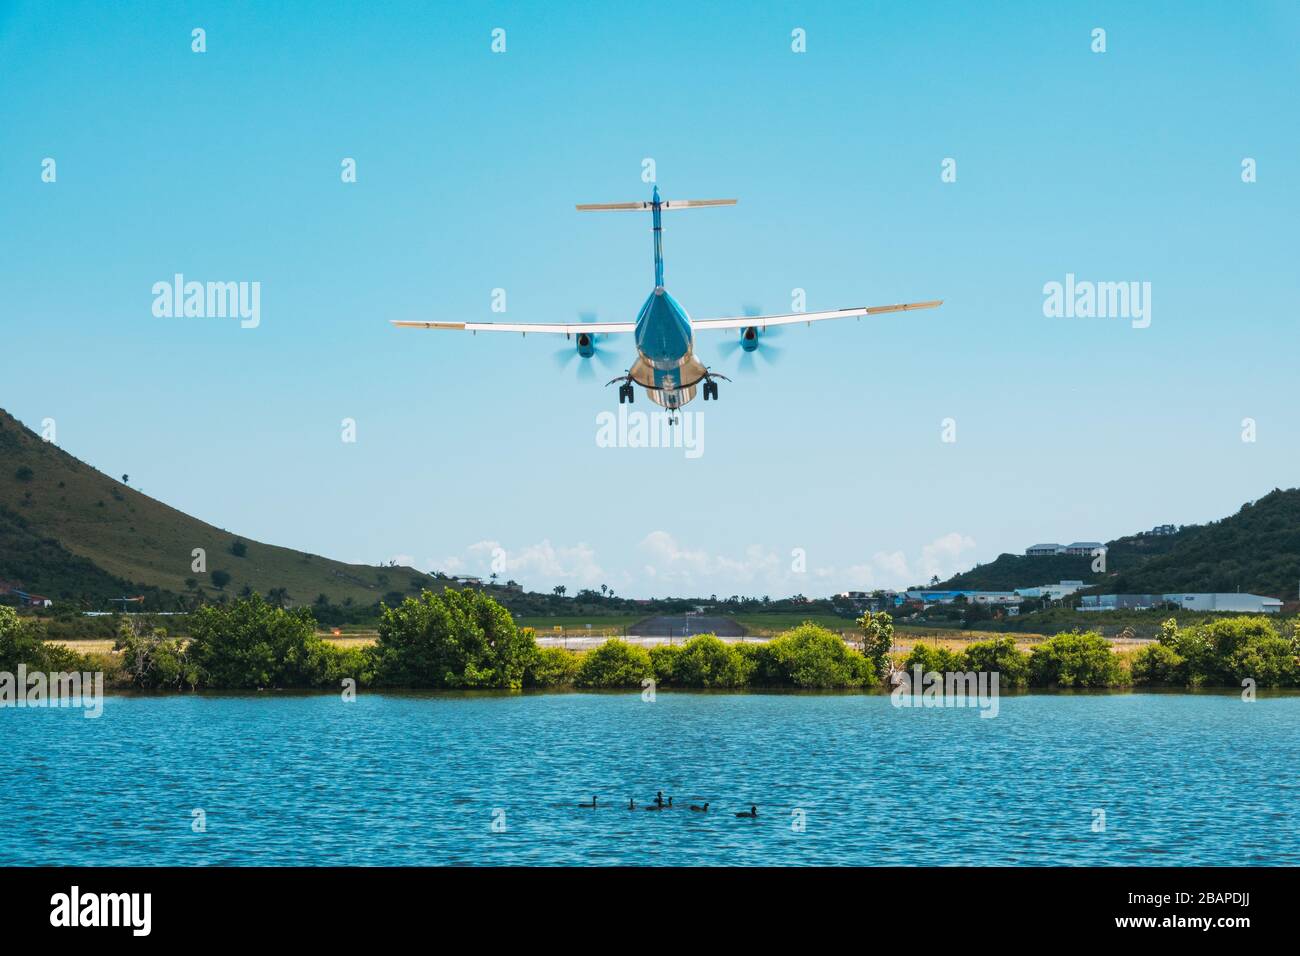 An ATR 42 regional aircraft comes in to land at Grand Case-Espérance Airport, Saint Martin a collectivity in the French Caribbean Stock Photo